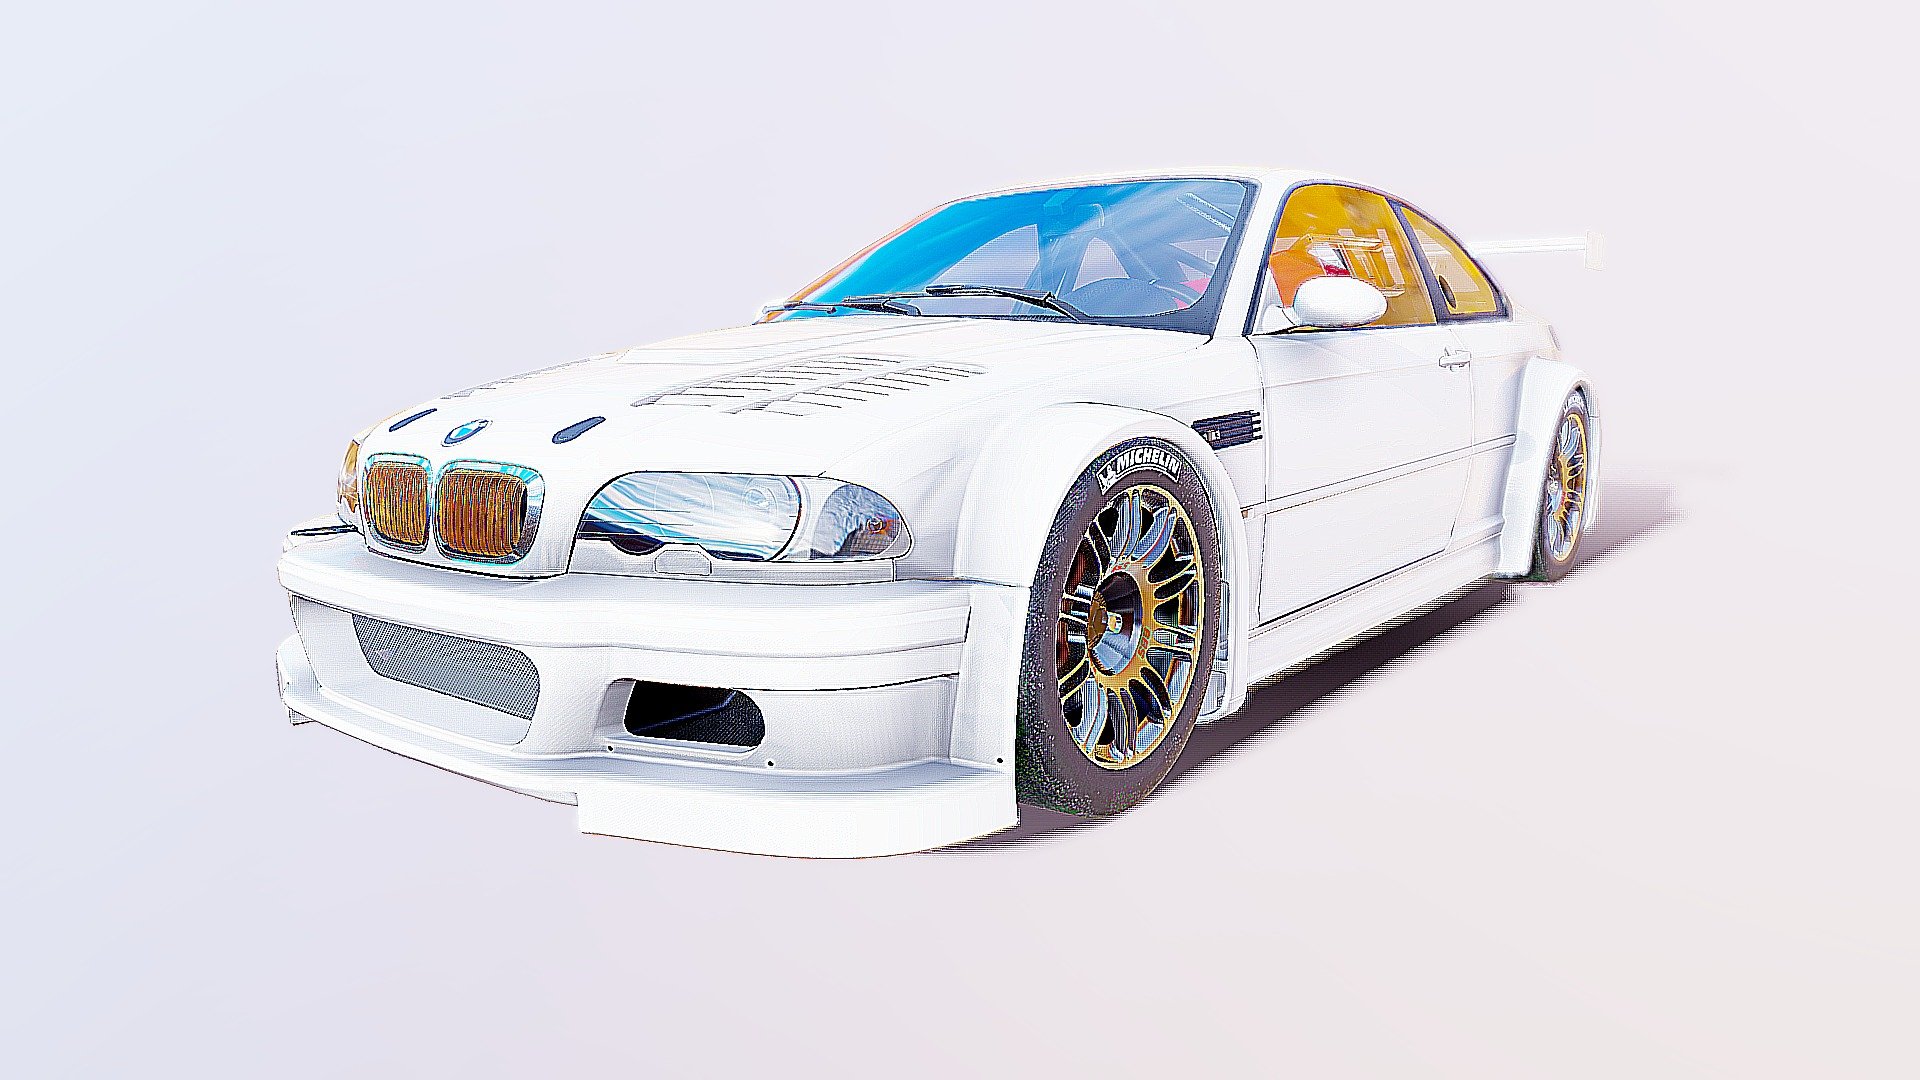 The BMW M3 GTR (E46) is a GT racing car created by BMW based on the M3 E46 which is featured in Need for Speed: Most Wanted, Need for Speed: Most Wanted 5-1-0, Need for Speed: Carbon, Need for Speed: Most Wanted (2012), Need for Speed: Edge and Need for Speed: Heat. It also appears in the files for the alpha and beta versions of Need for Speed: World. The BMW M3 GTR appears in Need for Speed: Most Wanted and is available from the start of the game.

The car plays an important role in the career story as it is the player's car at the start of the game until it is sabotaged. The car is returned to the player after defeating Razor, the number 1 on the blacklist, which also unlocks the Quick Race game mode.

The M3 GTR can also be driven in the Challenge Series' secret event called &ldquo;Burger King Challenge